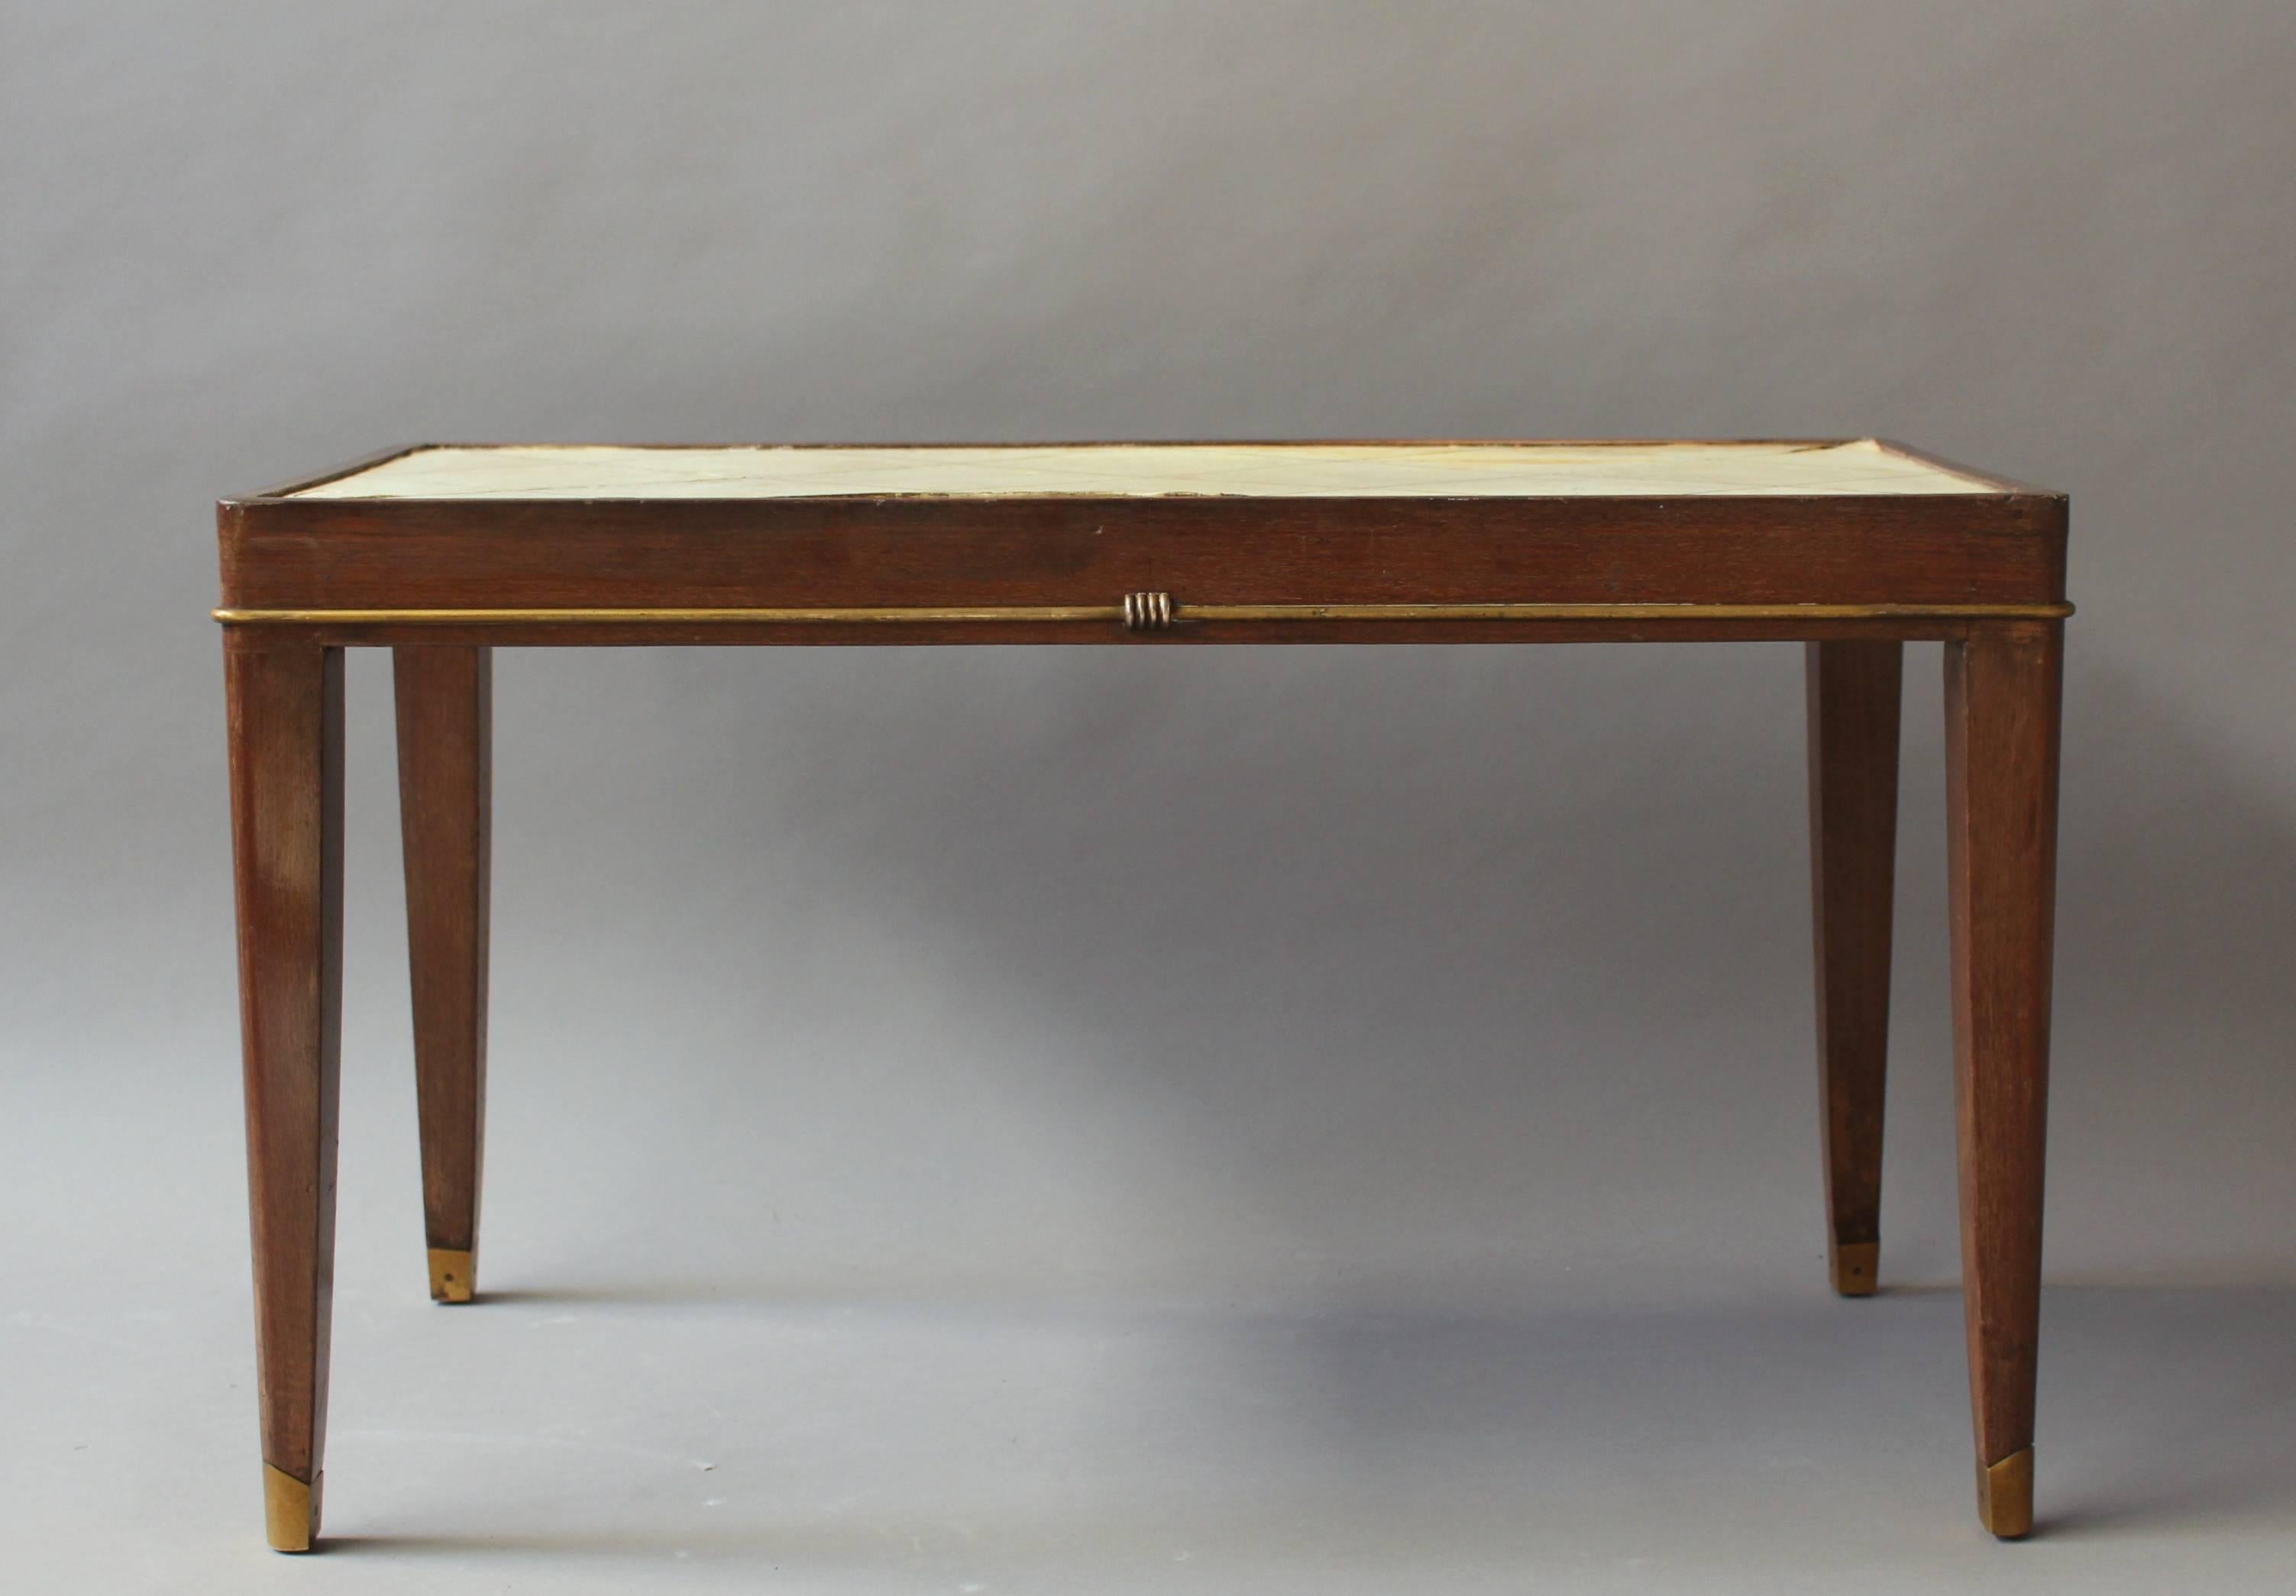 A fine French Art Deco rosewood coffee table with a parchment covered top and bronze details.